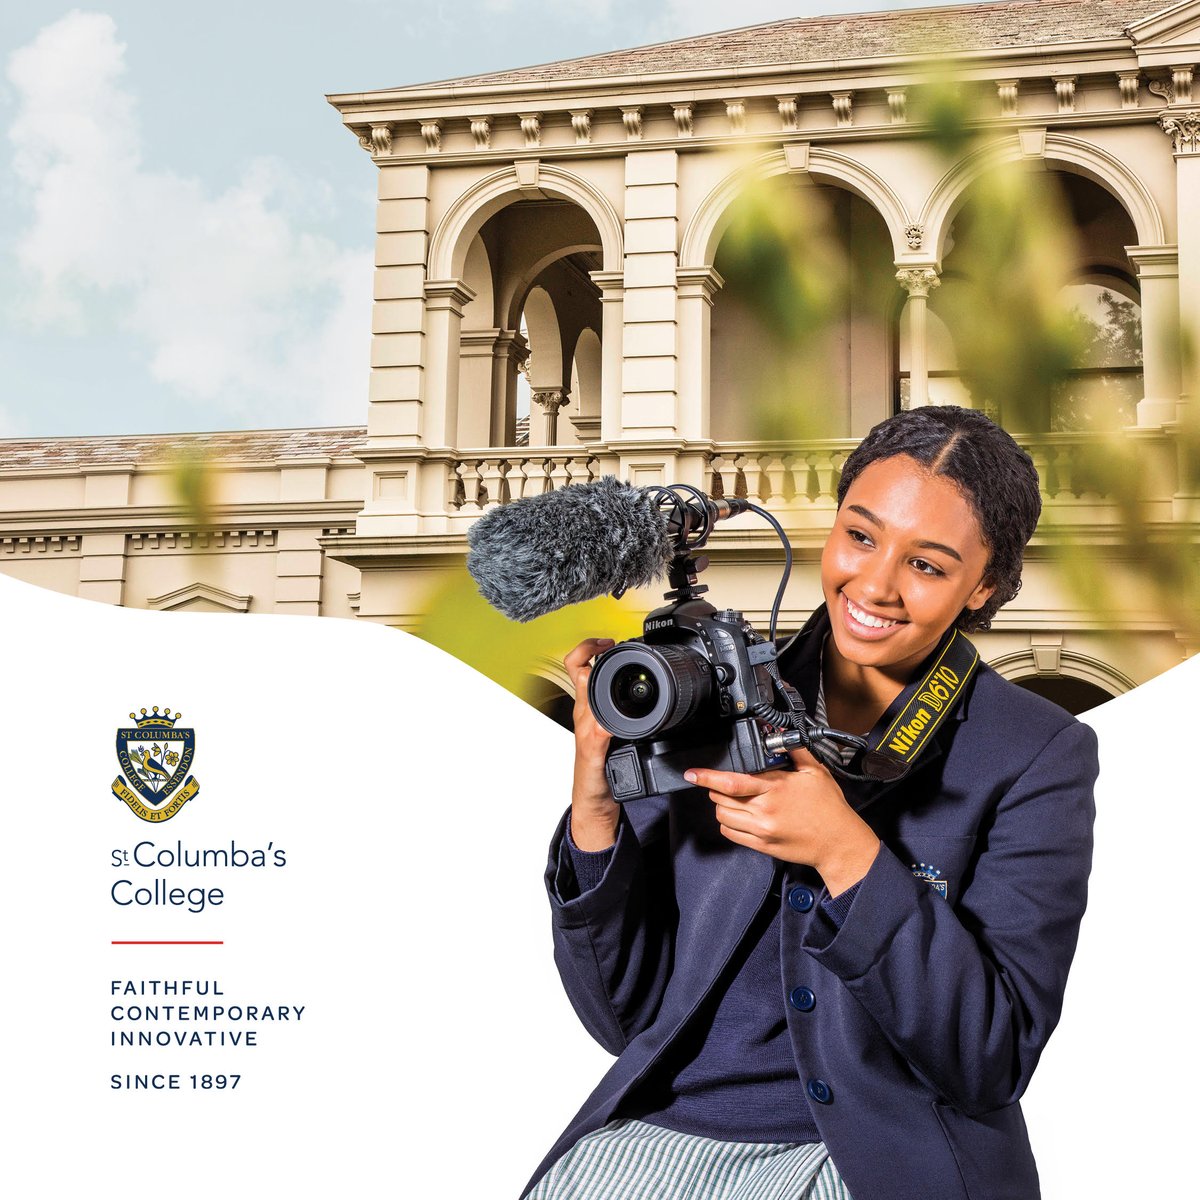 Our brilliant rebrand brings about a refreshed visual identity for all to celebrate St Columba’s College. Conveying a supportive and innovative educational environment, where aspirations for tomorrow’s opportunities are fostered. 
#stcolumbas #proudlyStColumbas #weareStColumbas